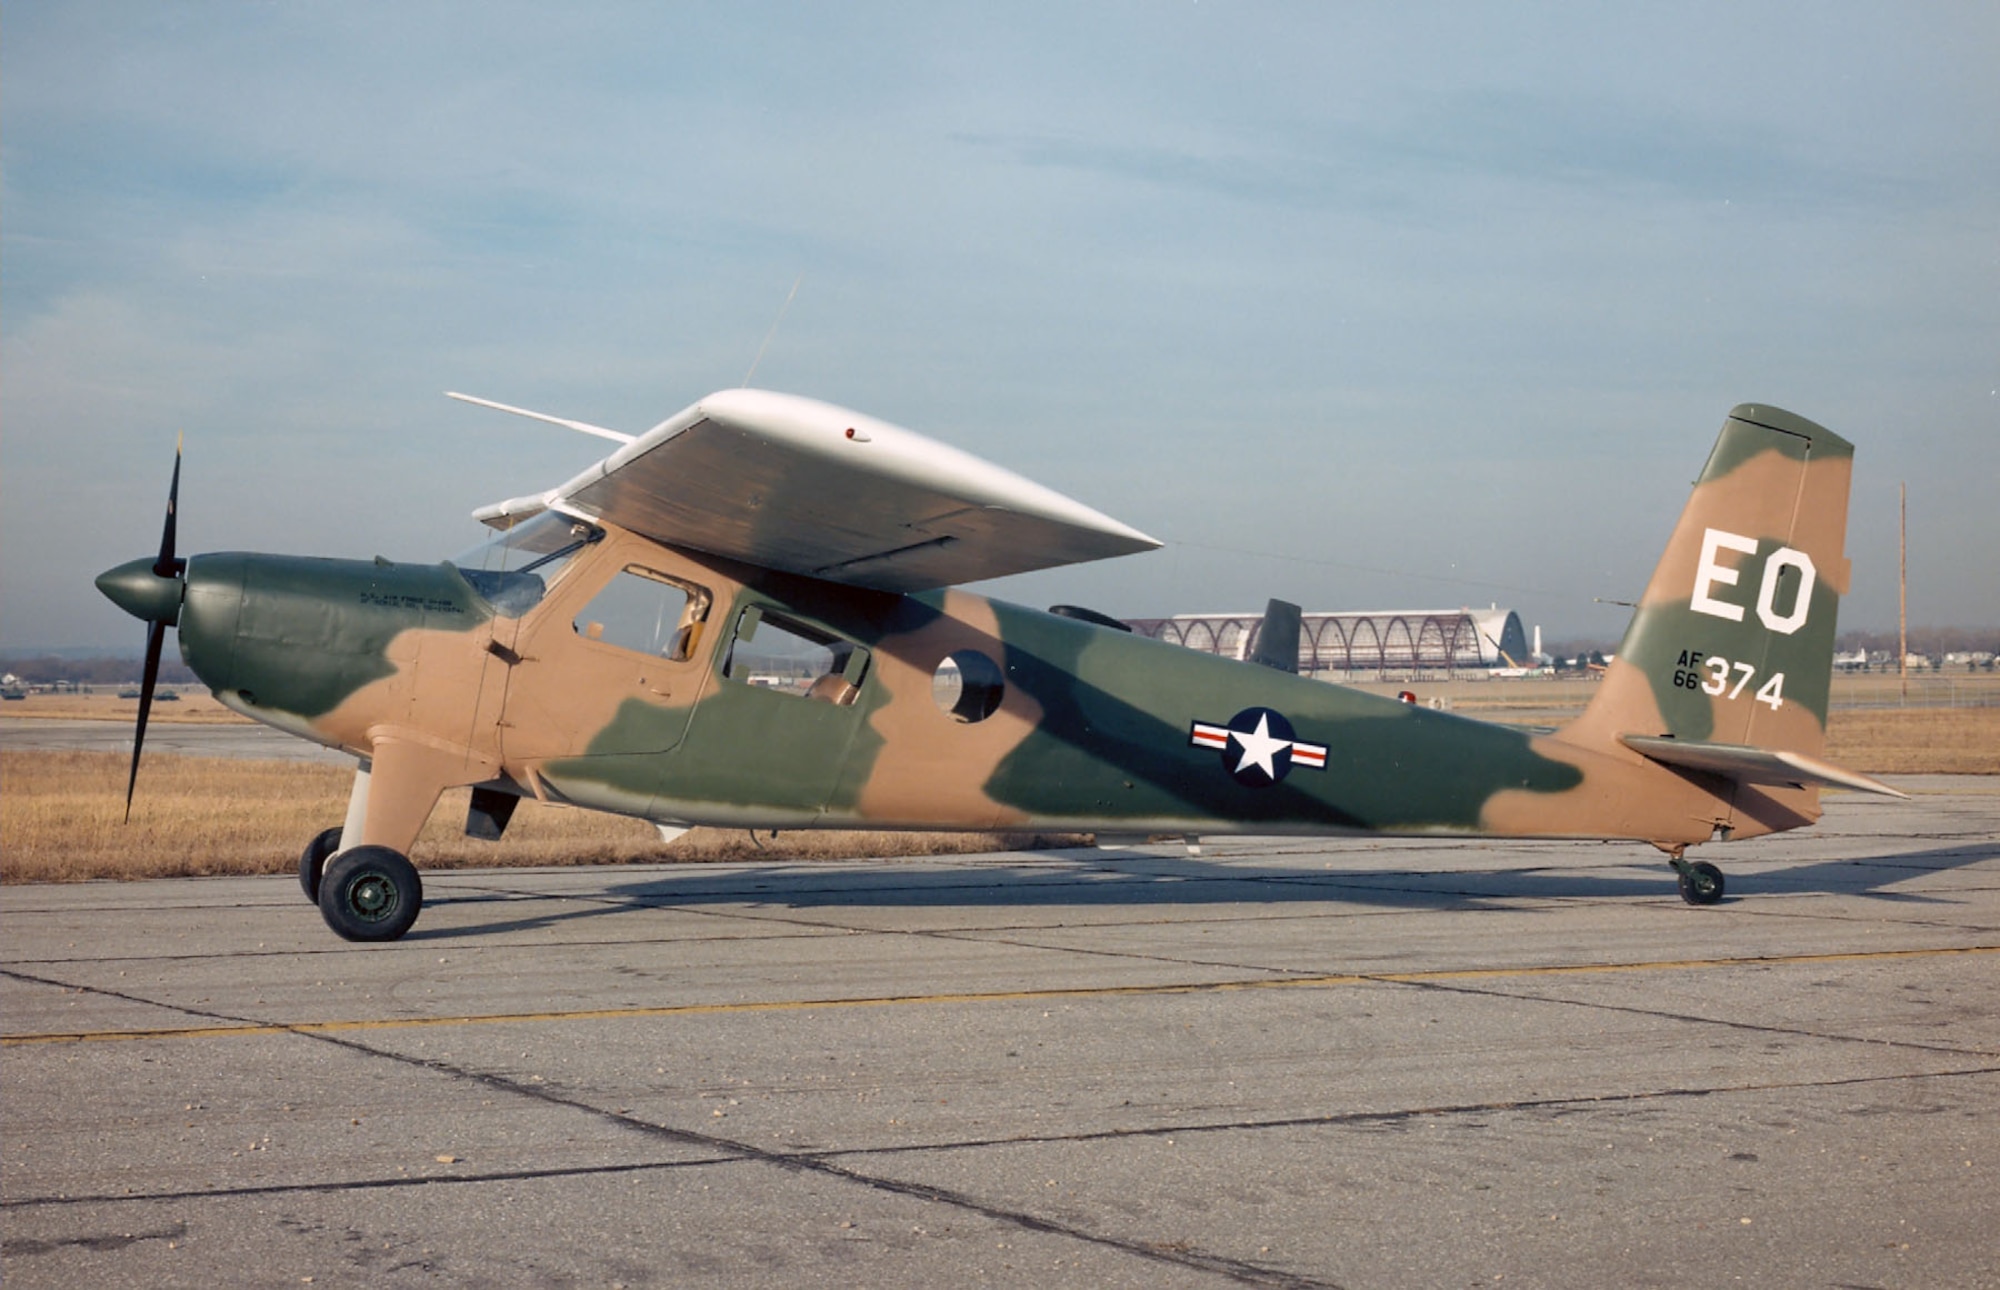 DAYTON, Ohio -- Helio U-10D at the National Museum of the United States Air Force. (U.S. Air Force photo)